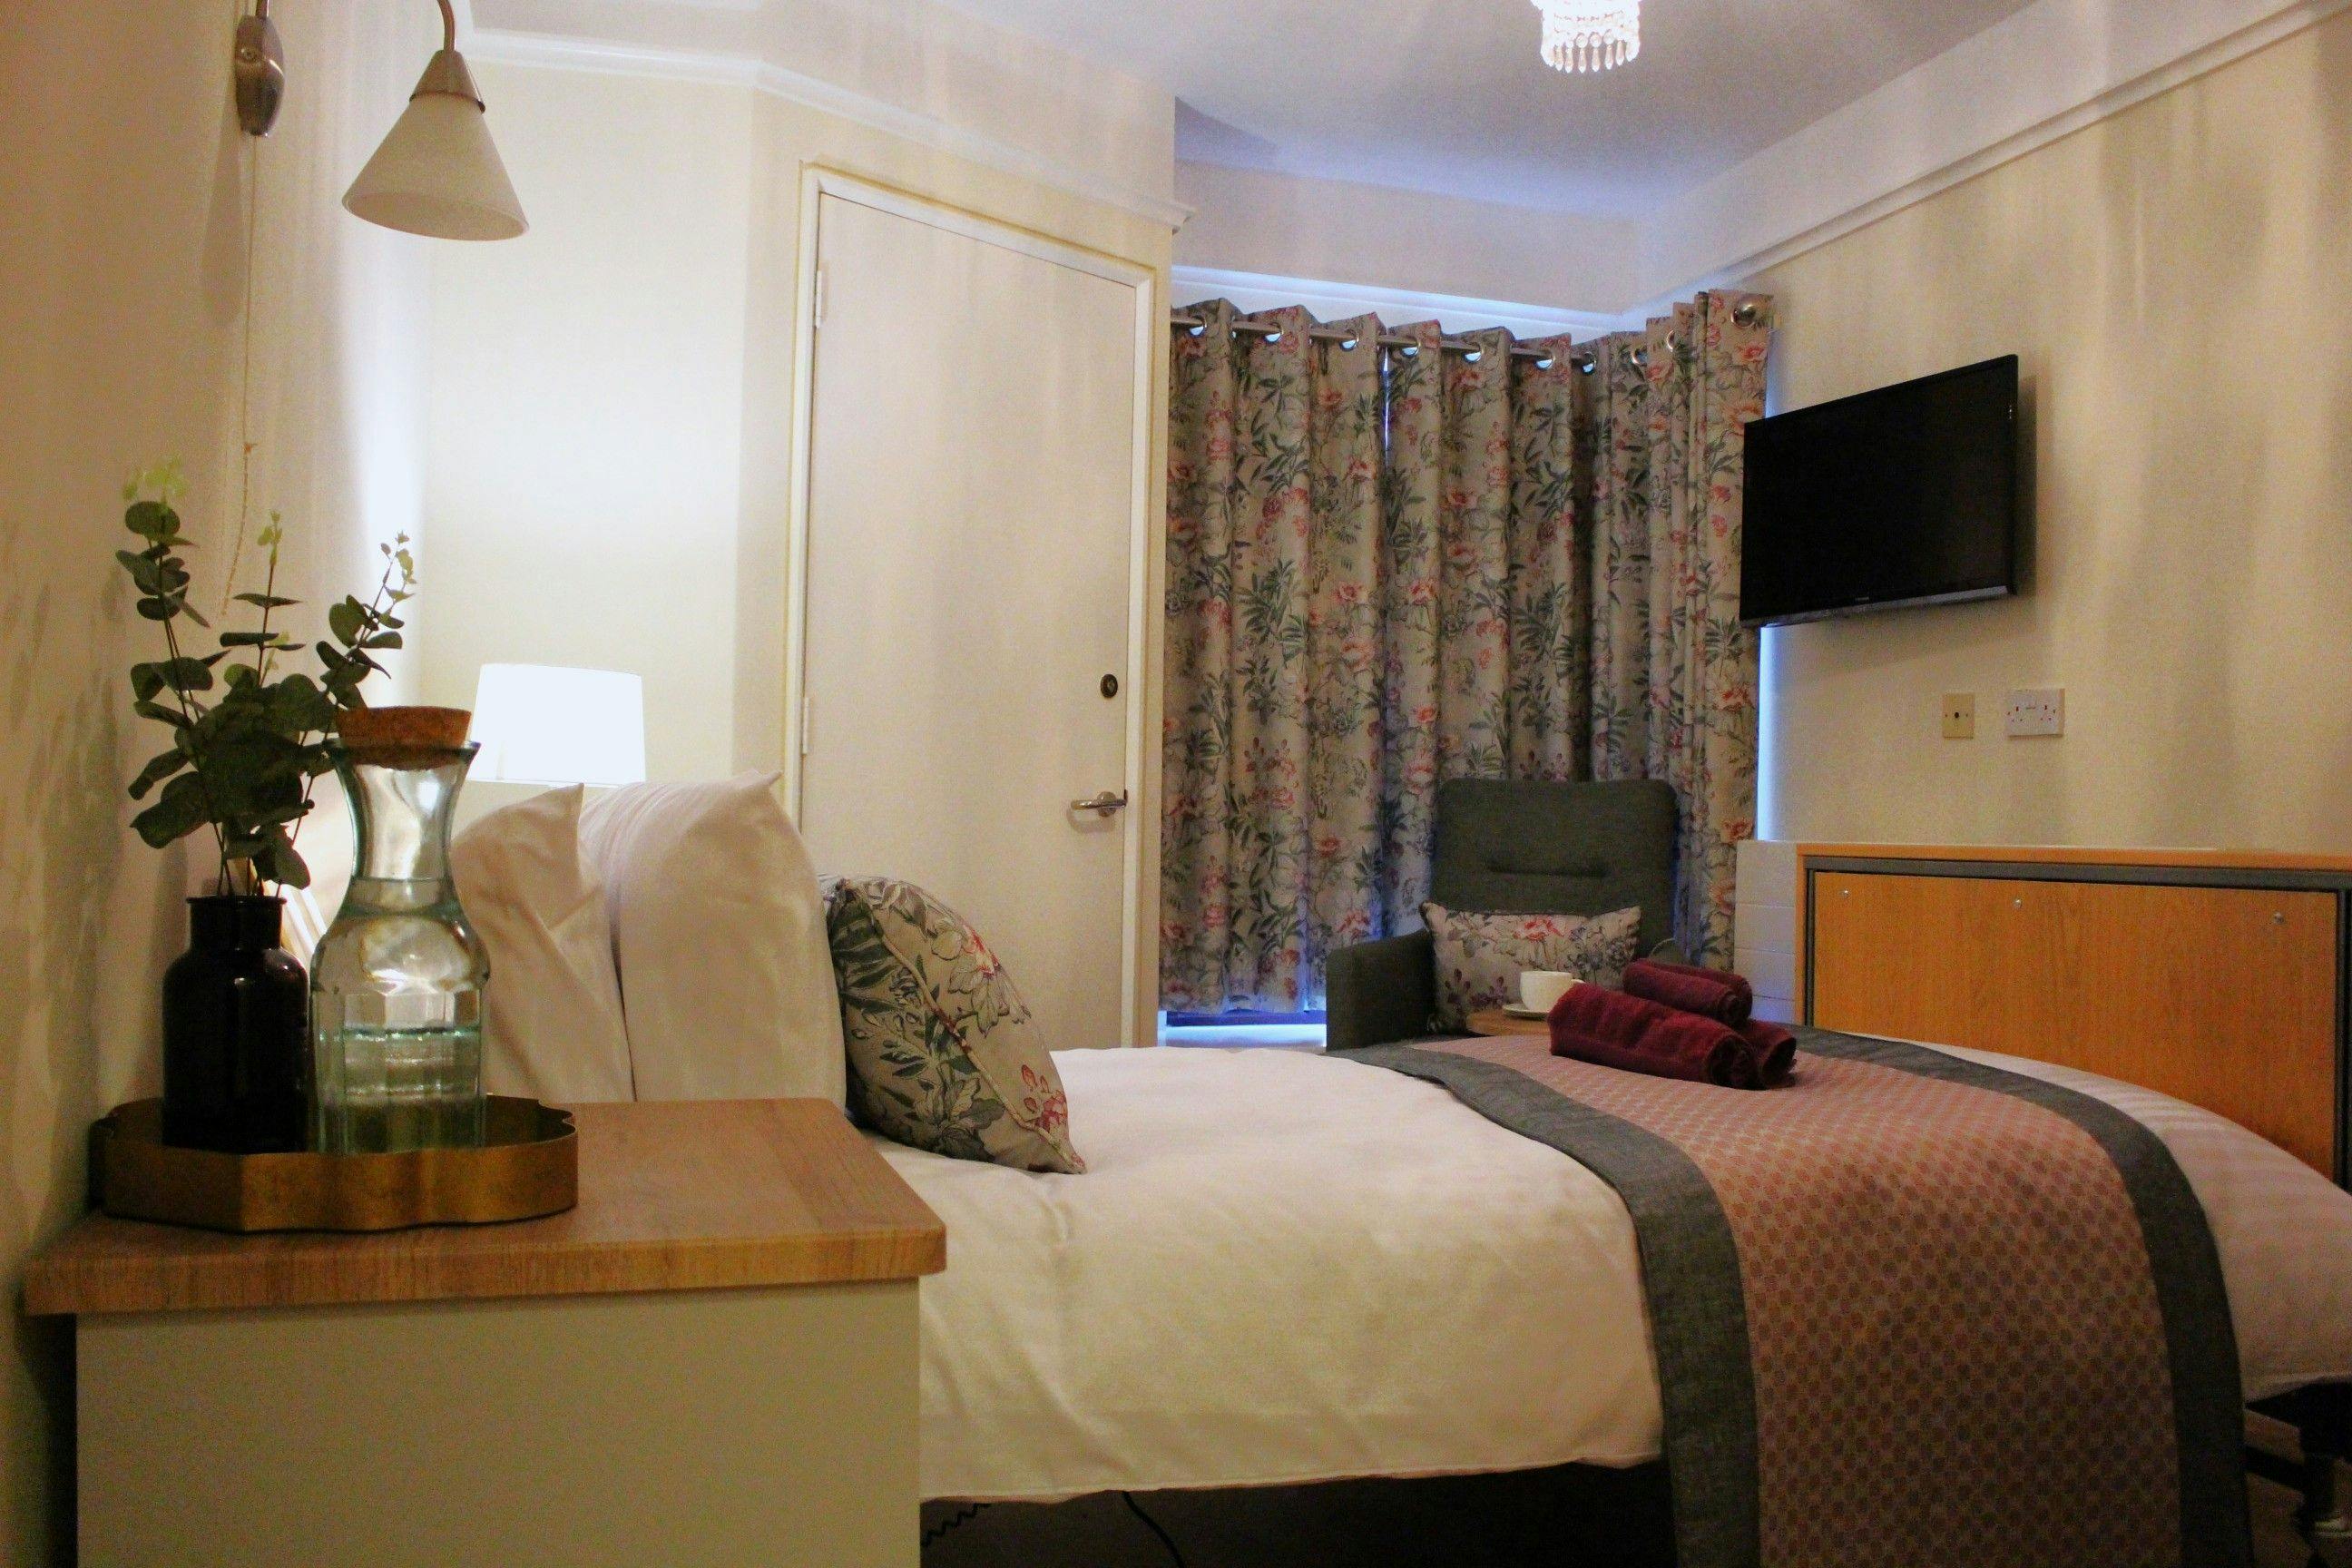 Bedroom at Beechlands Care Home in Loughton, Essex